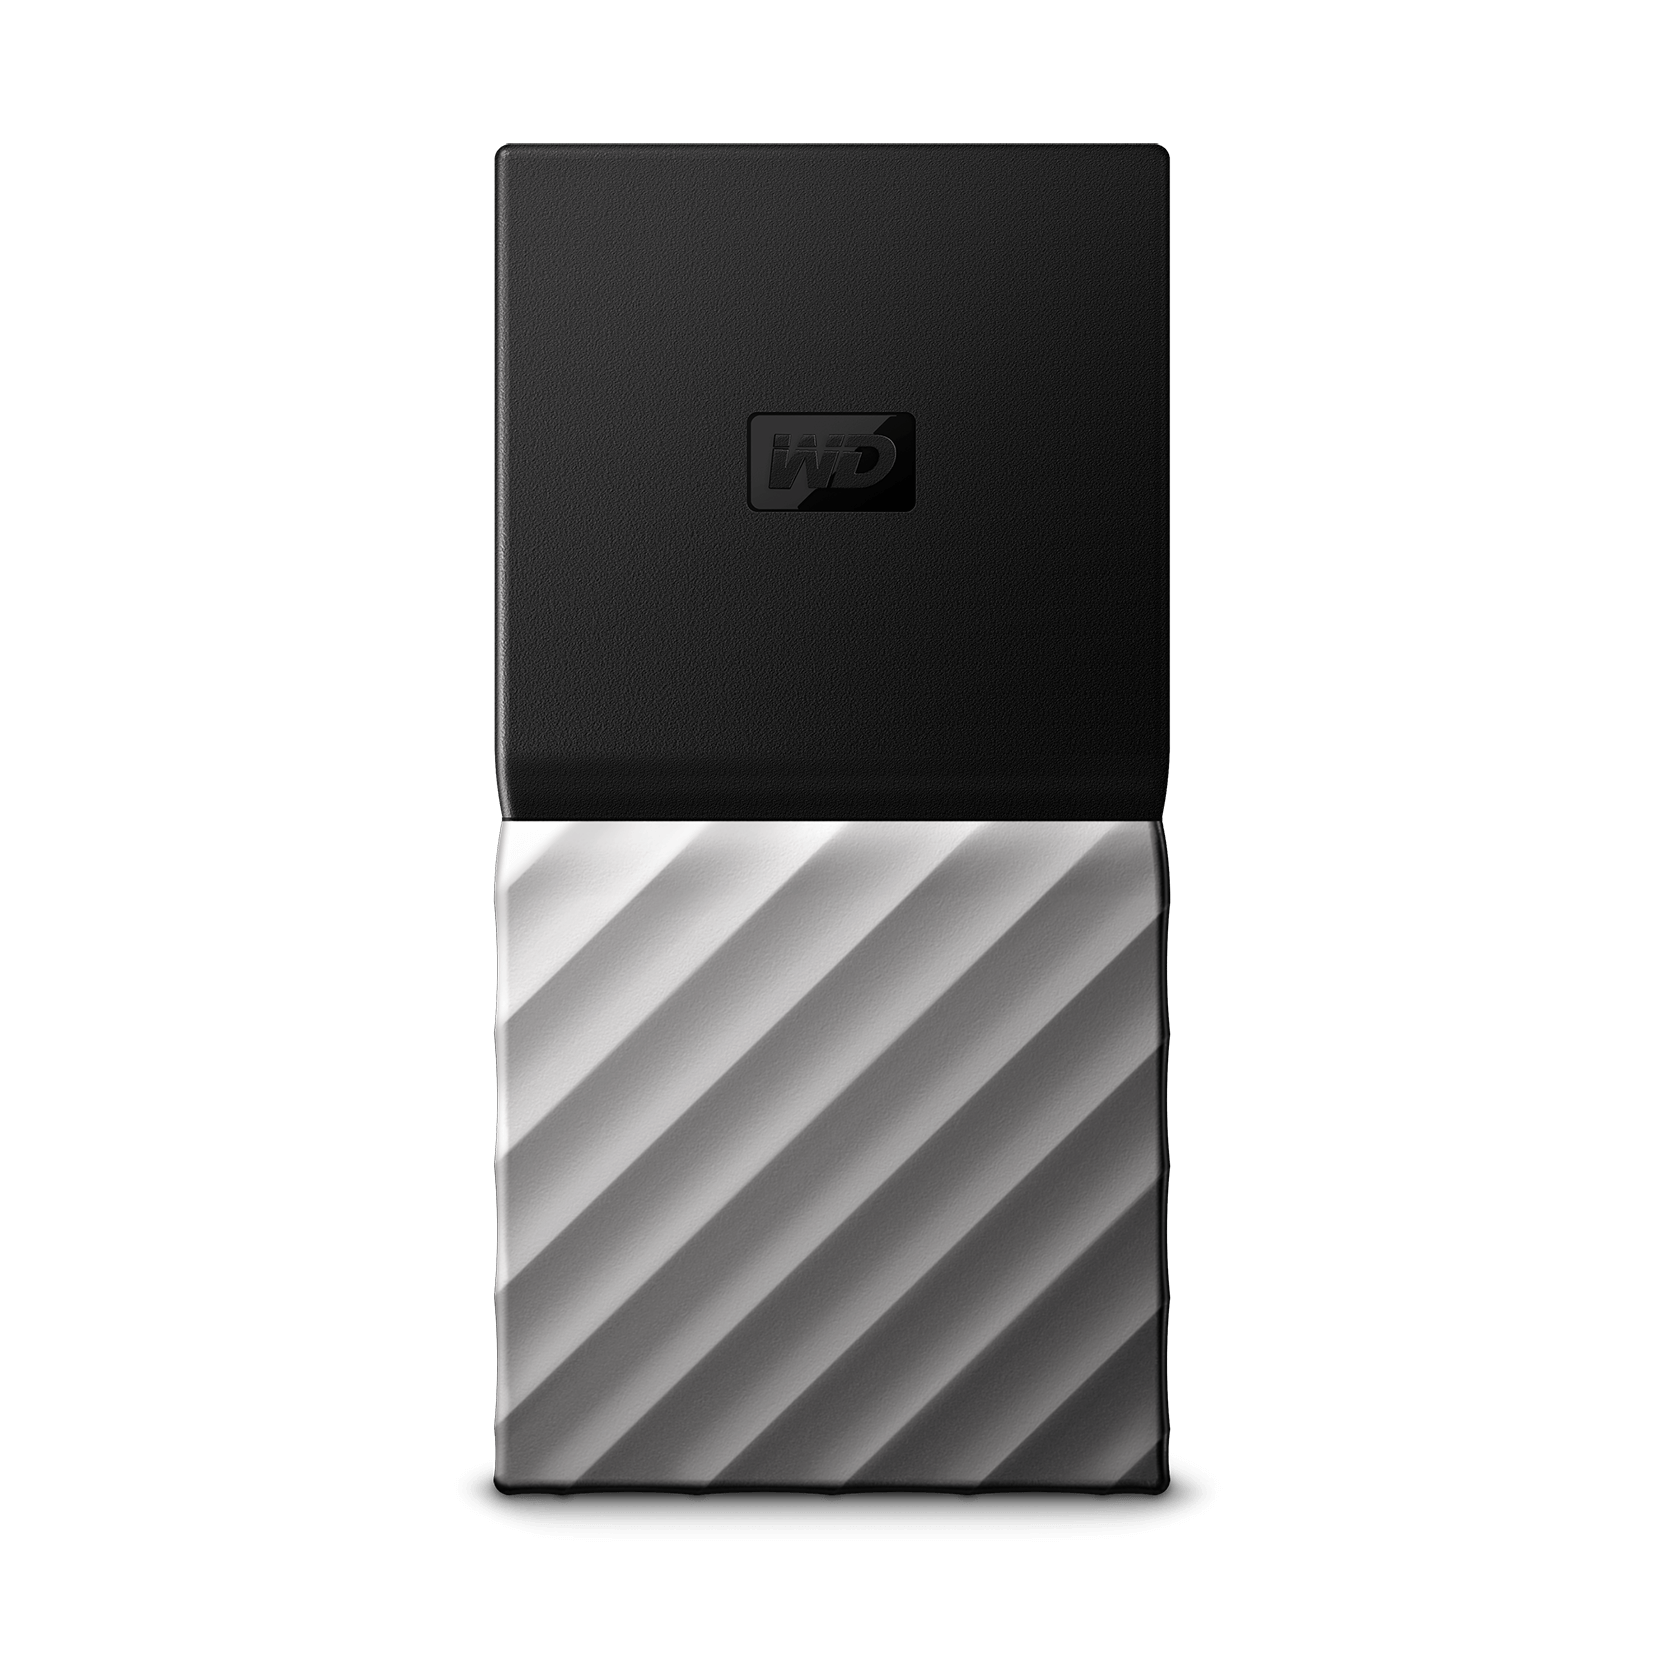 WD 256GB My Passport Portable SSD, External Solid State Drive, Read Speeds Up to 540 MB/s - WDBKVX2560PSL-WESN - image 1 of 7